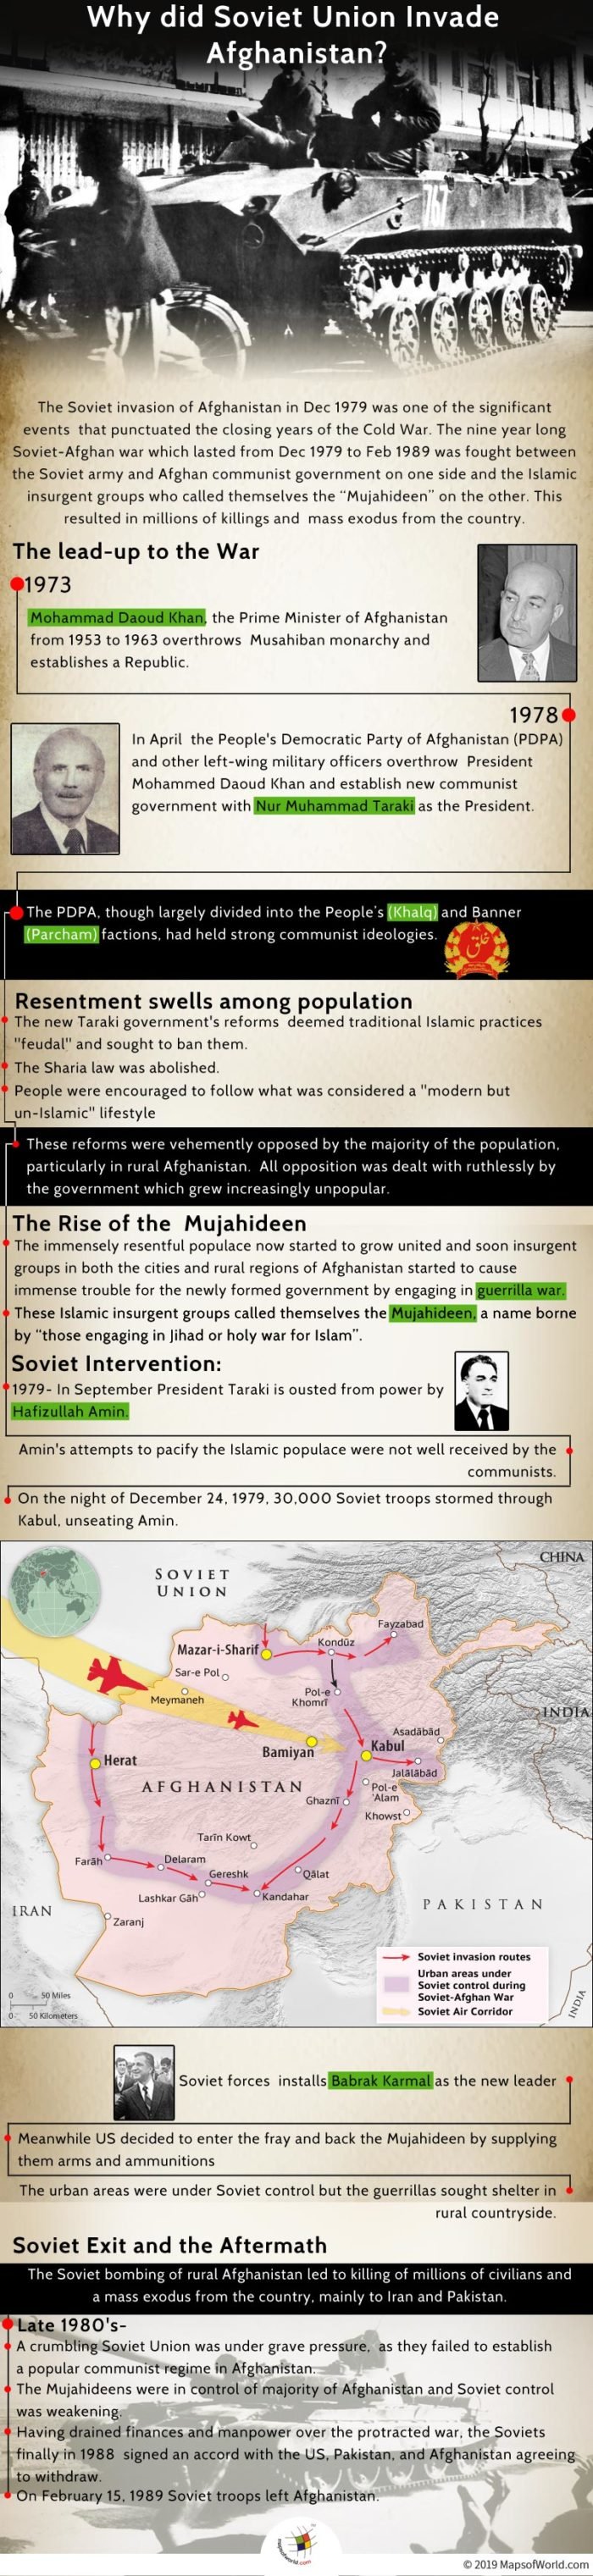 Infographic Giving Details on Soviet Invasion of Afghanistan